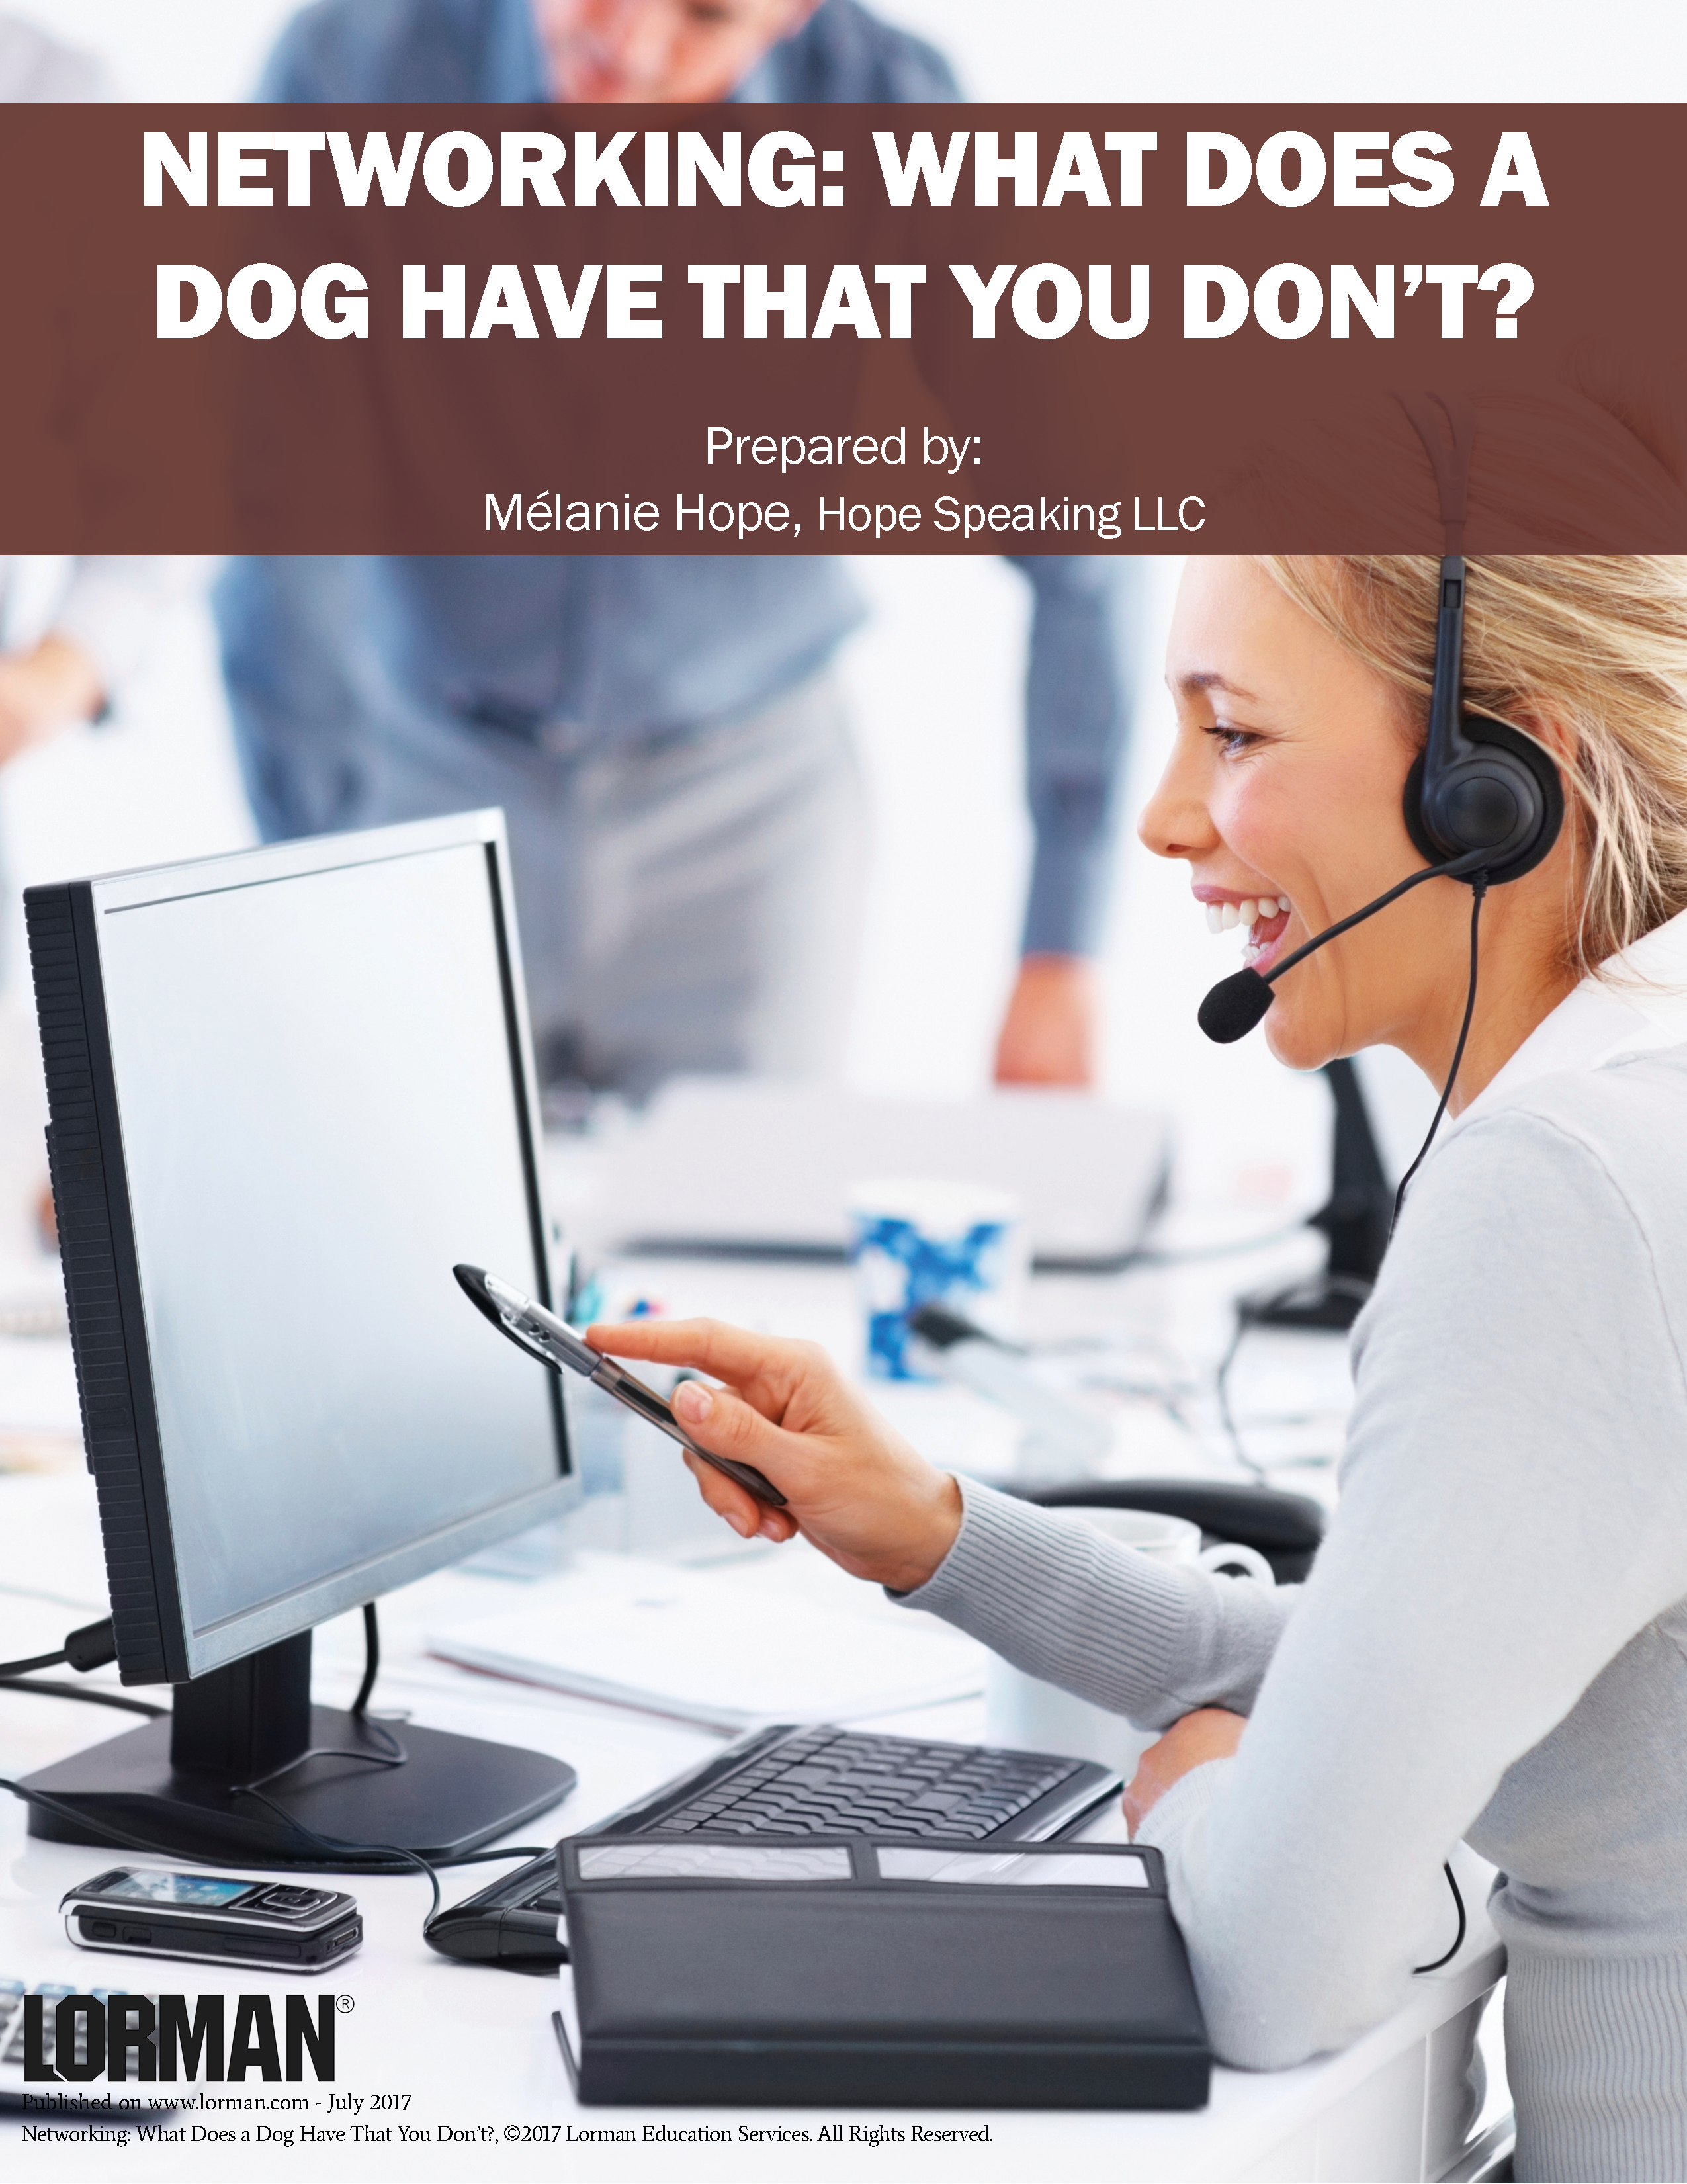 Networking: What Does a Dog Have That You Don’t?